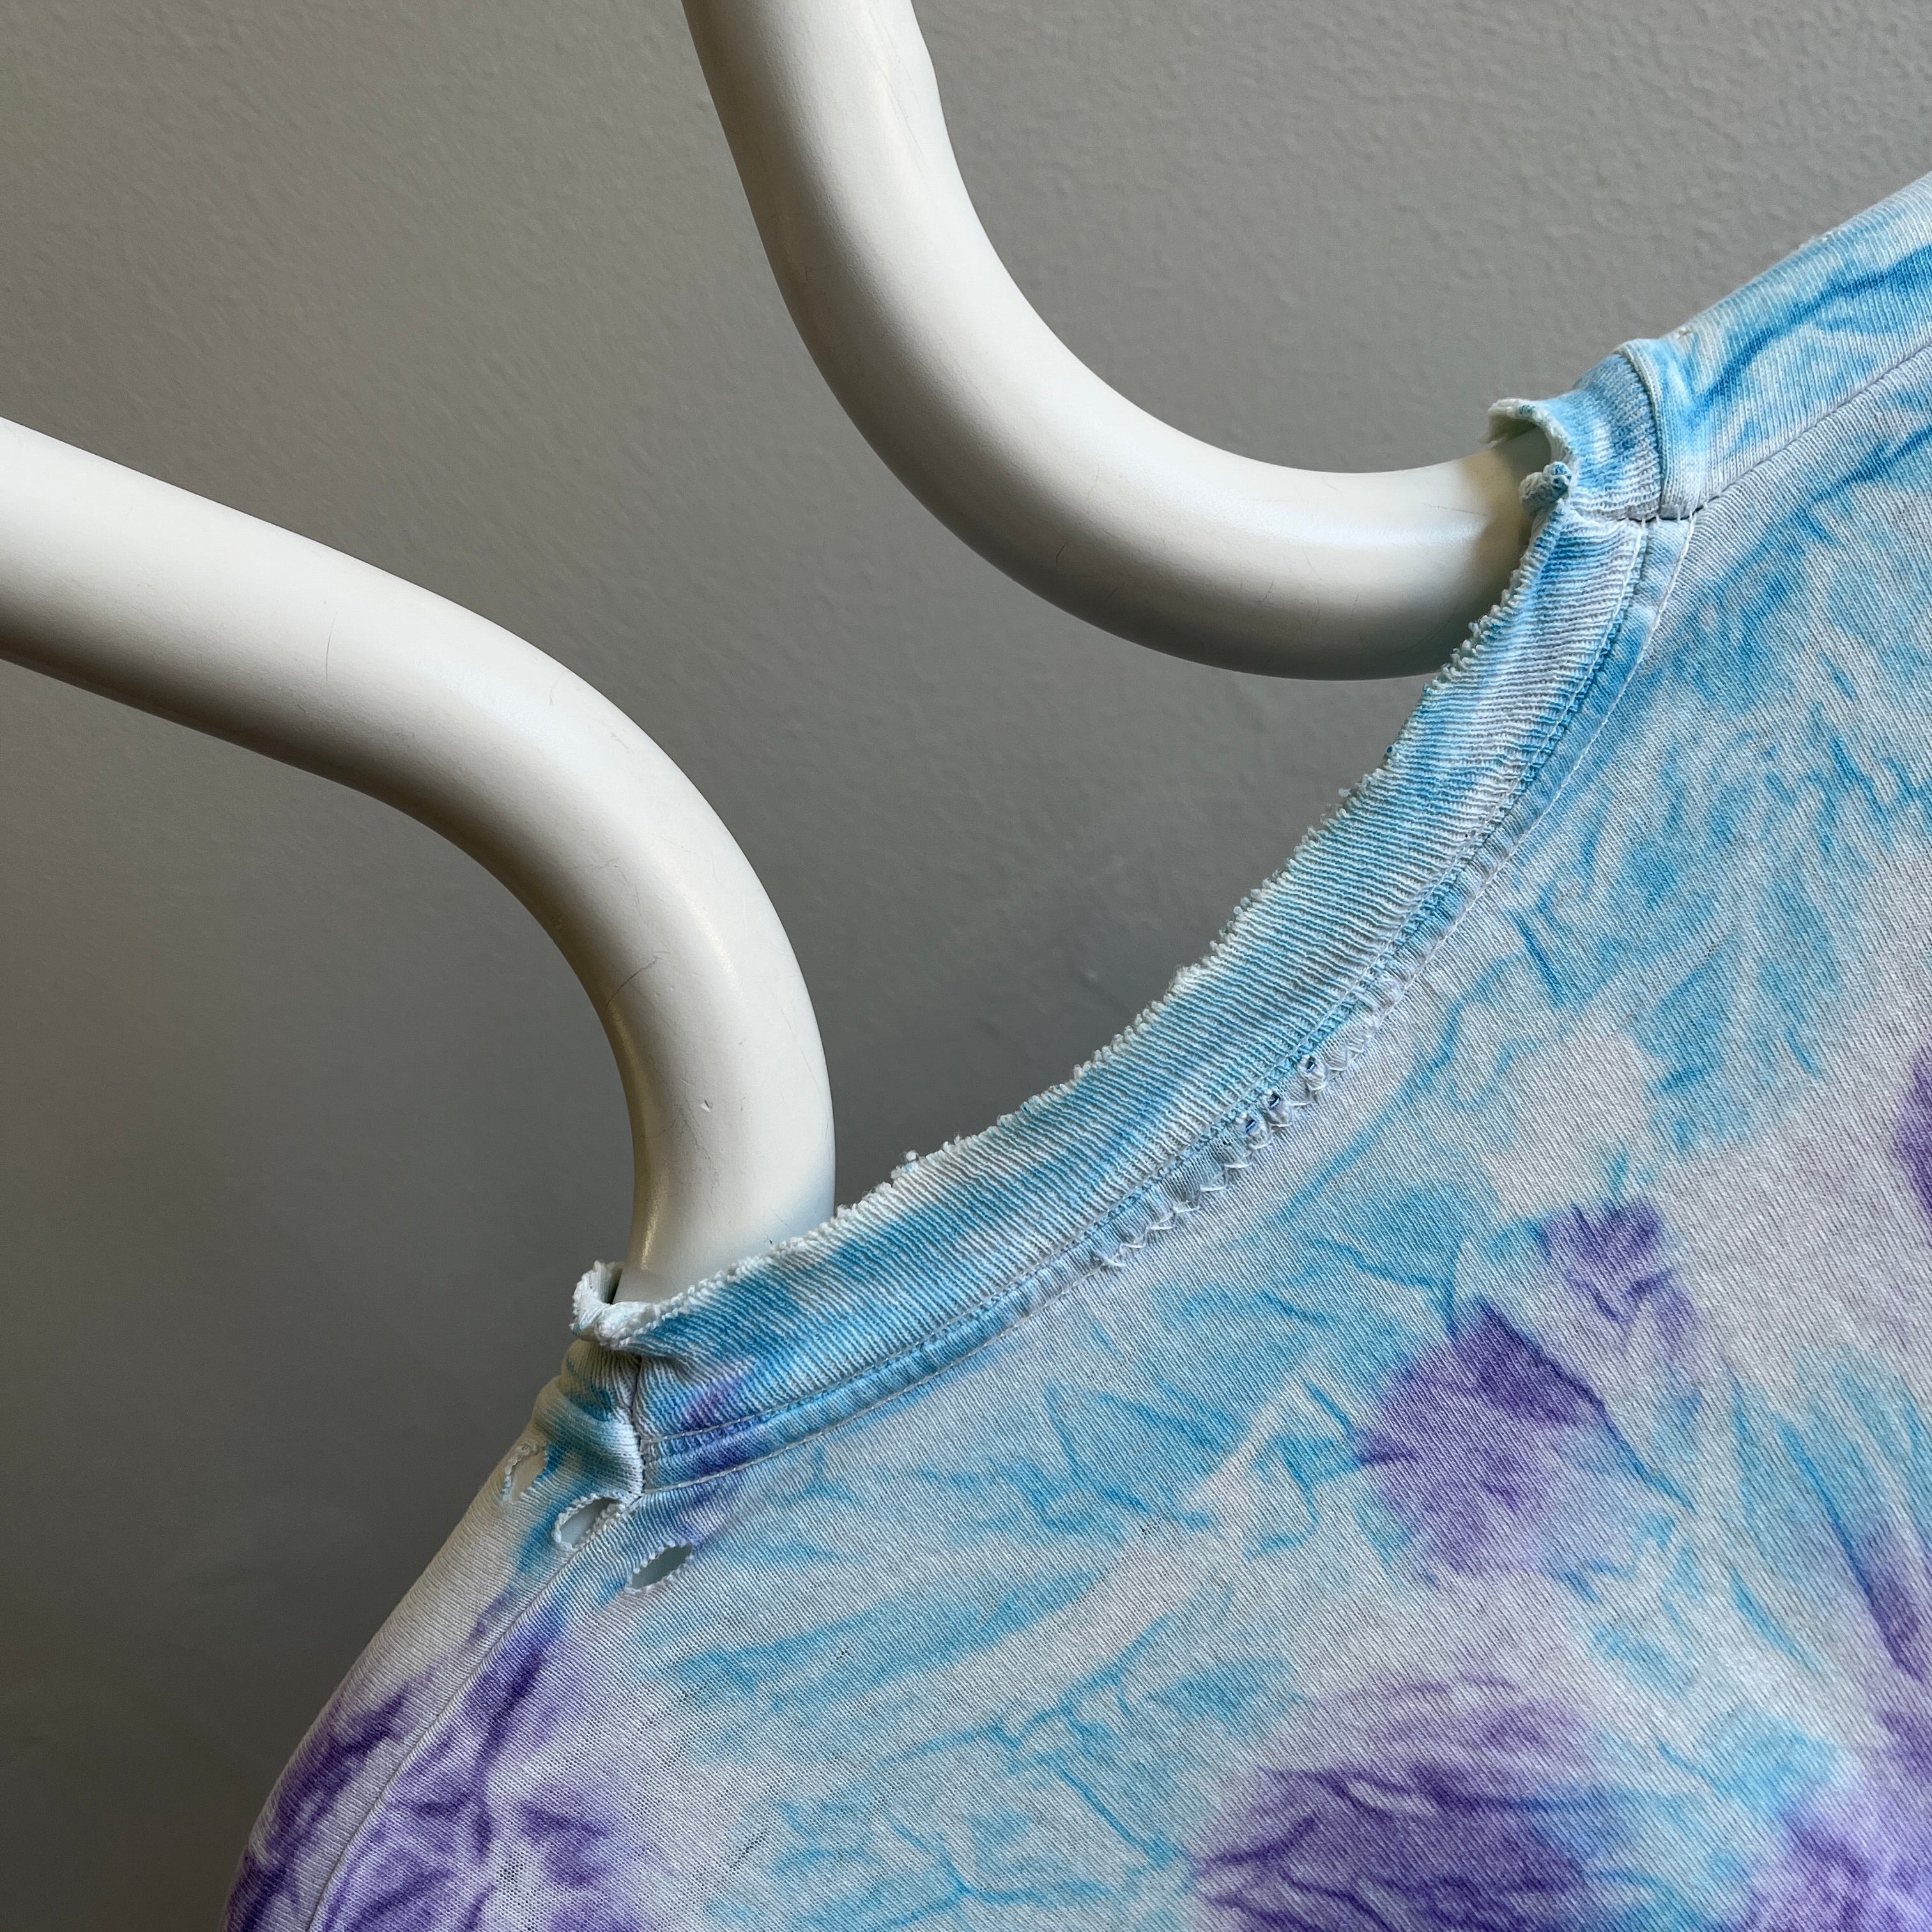 1990s Super Soft Beat Up Tie Dye T-Shirt - Perfectly Thrashed!